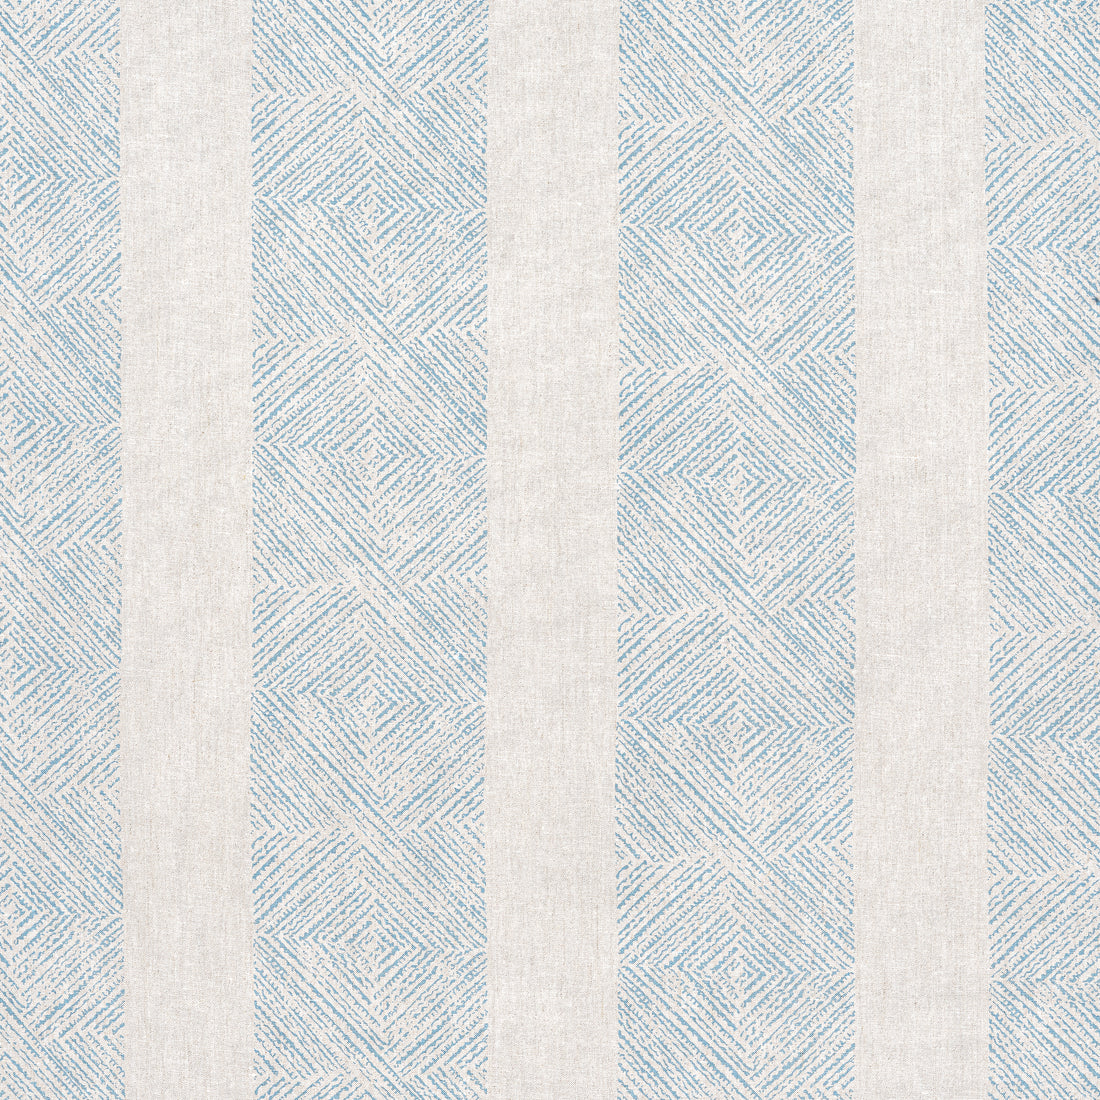 Clipperton Stripe fabric in blue on natural color - pattern number AF15129 - by Anna French in the Antilles collection